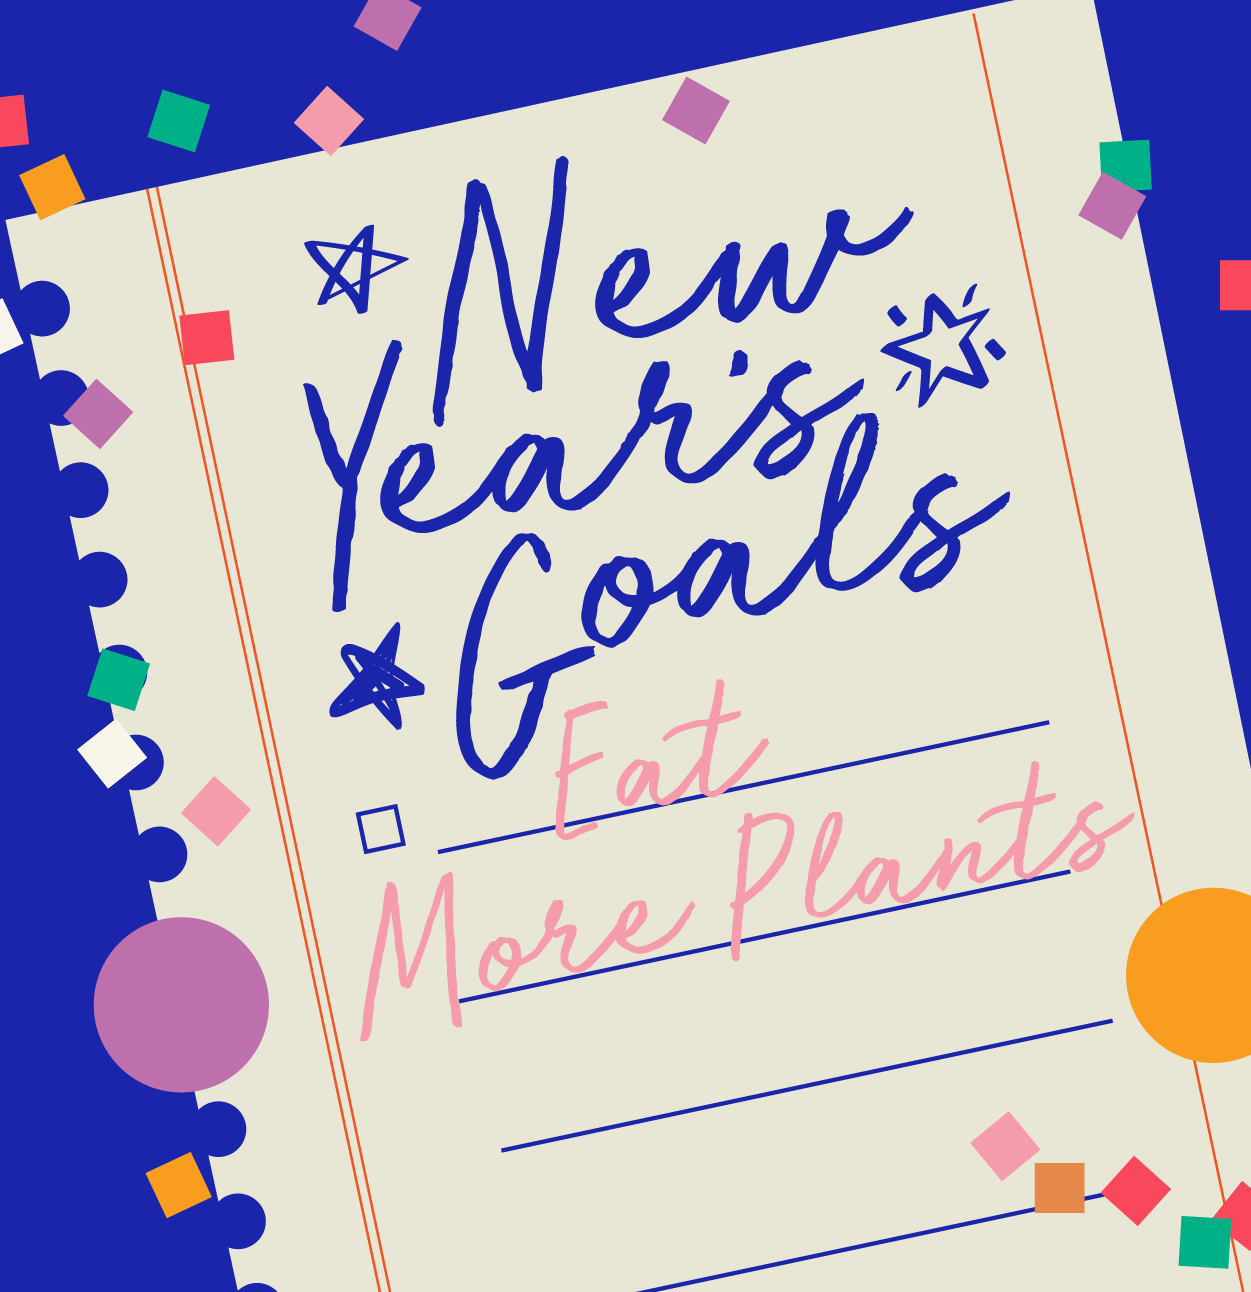 New Year's Goals Eat More Plants